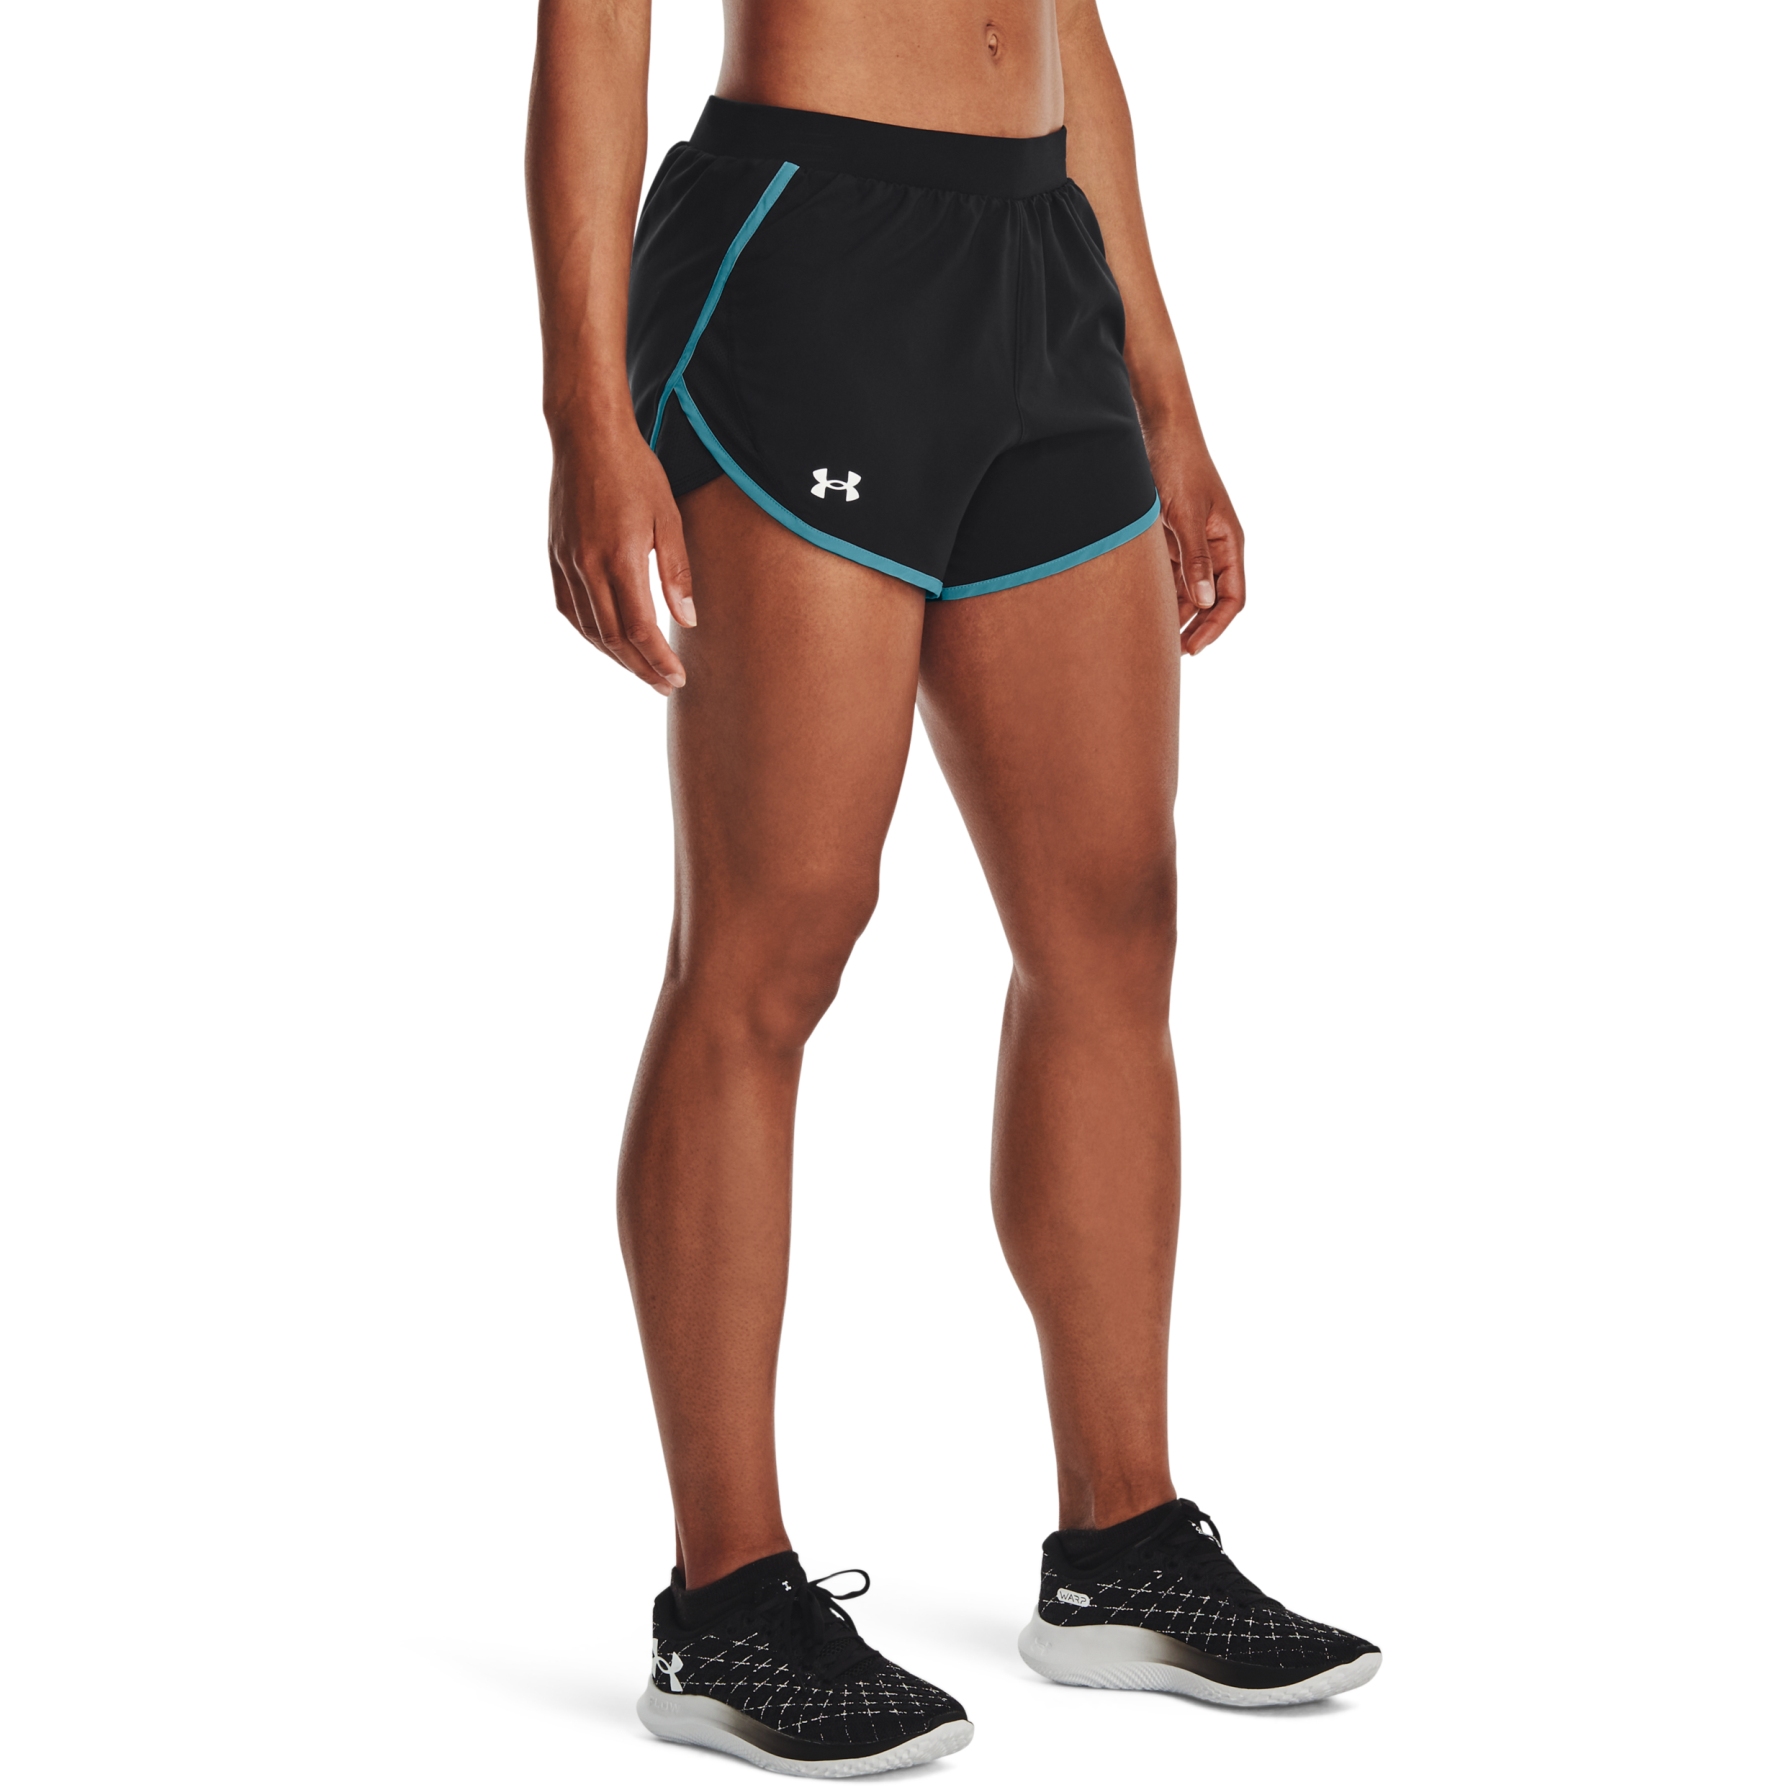 Immagine di Under Armour Shorts Donna - UA Fly-By 2.0 - Black/Glacier Blue/Reflective